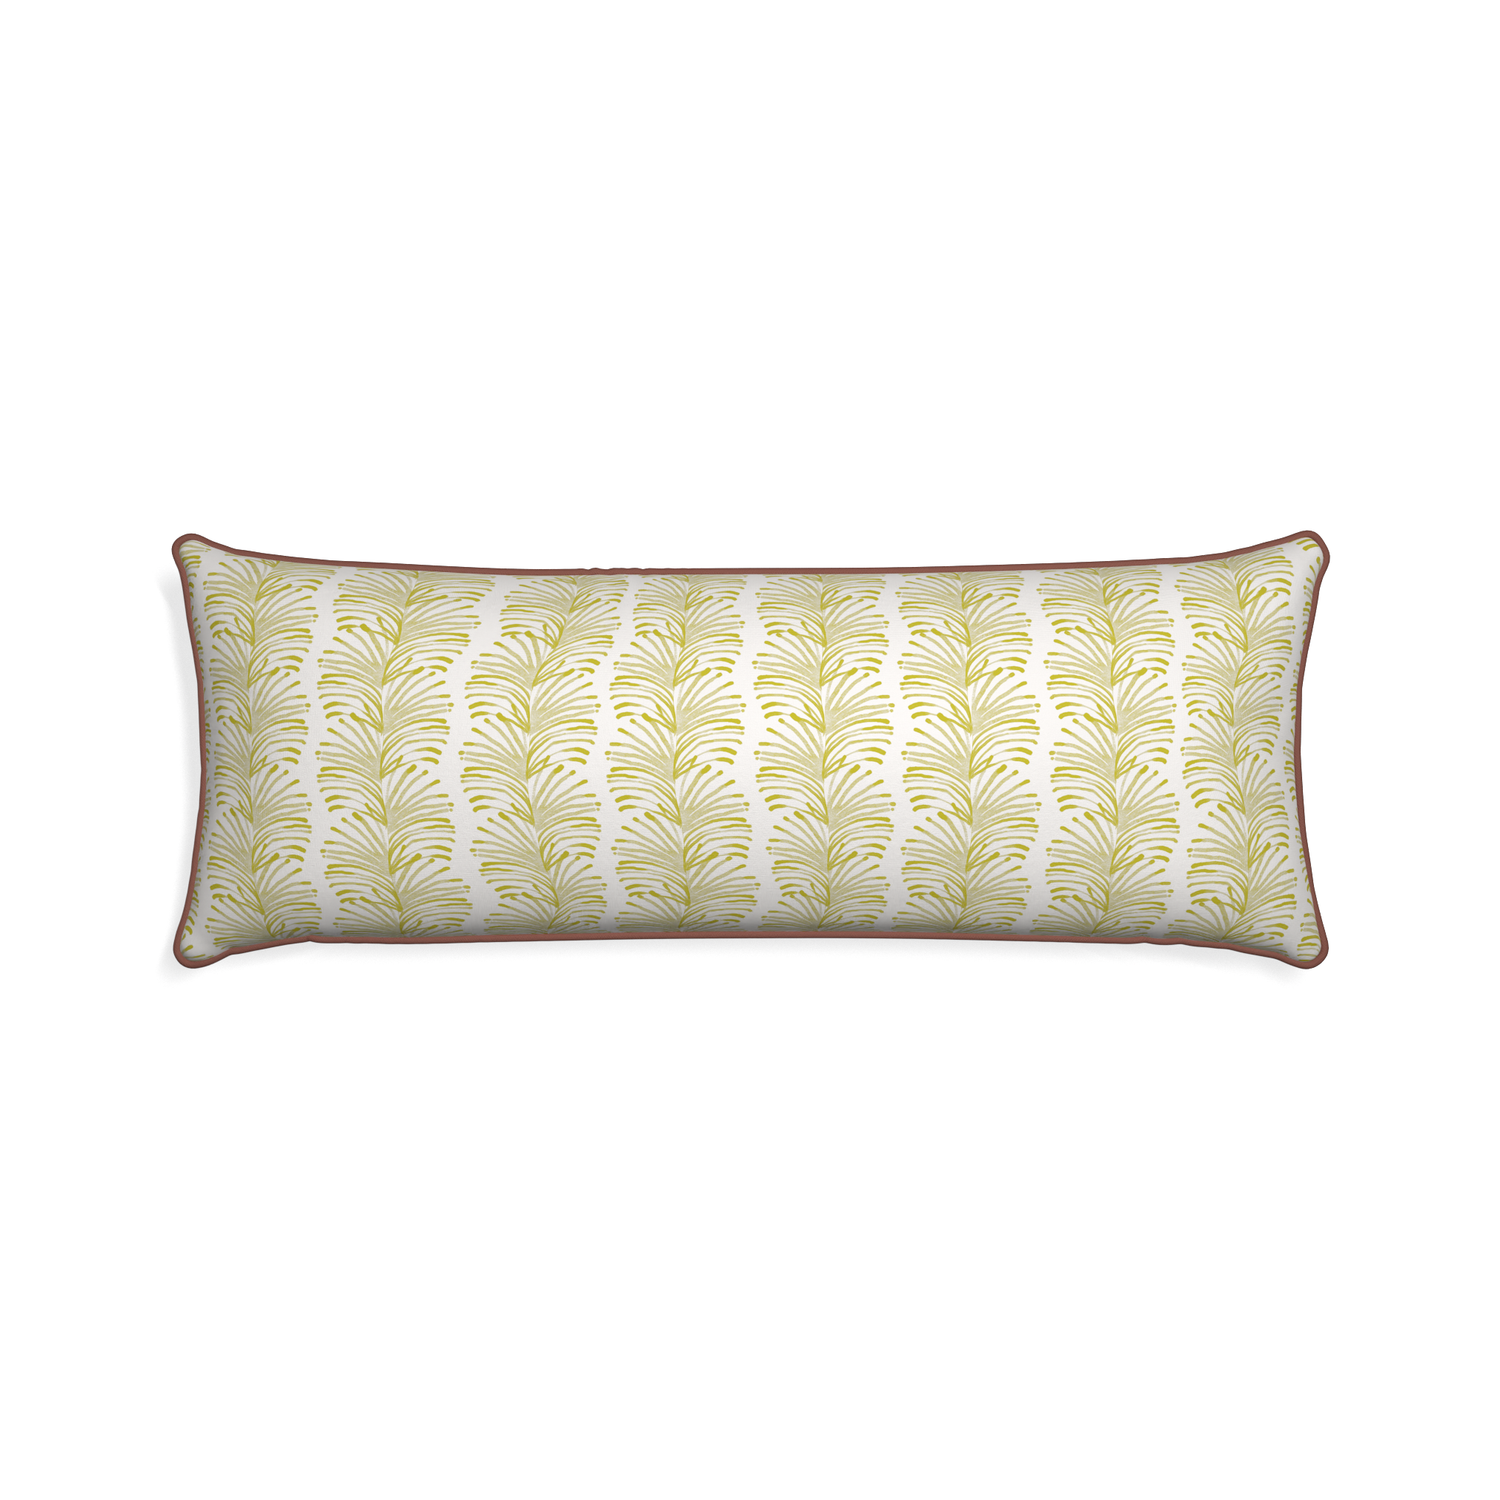 Xl-lumbar emma chartreuse custom pillow with w piping on white background